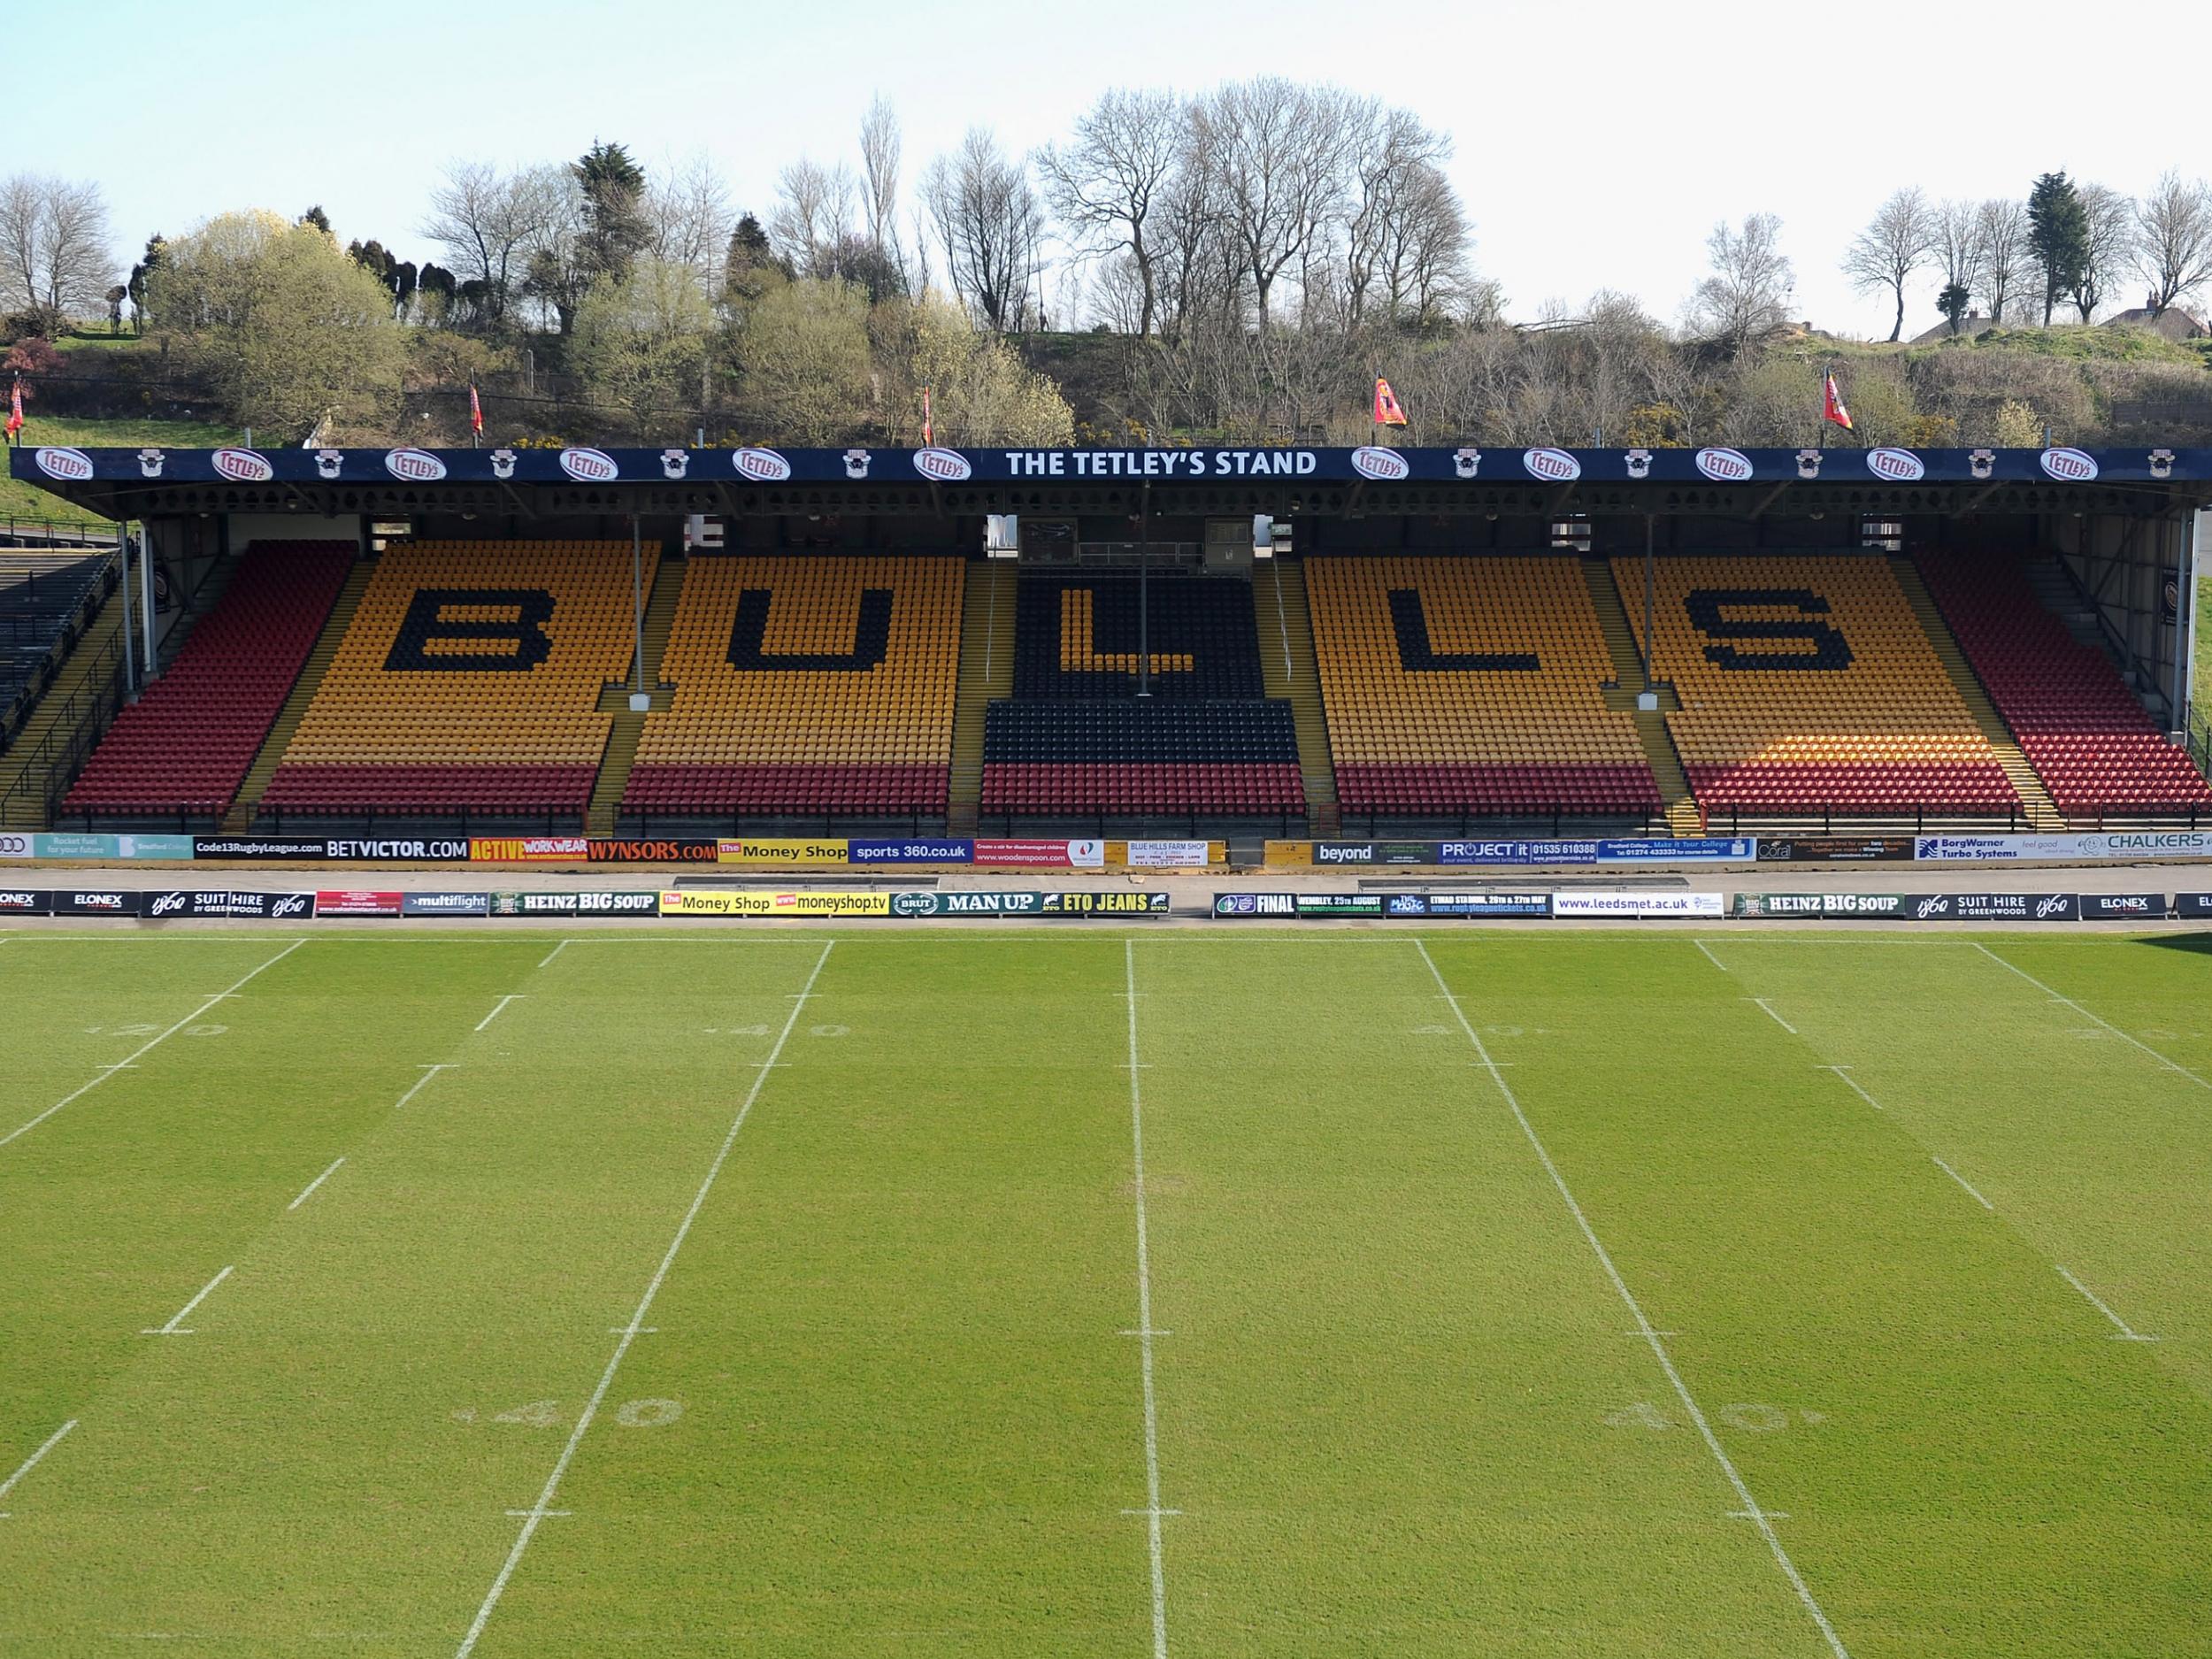 The Bulls currently play in the Kingstone Press Championship